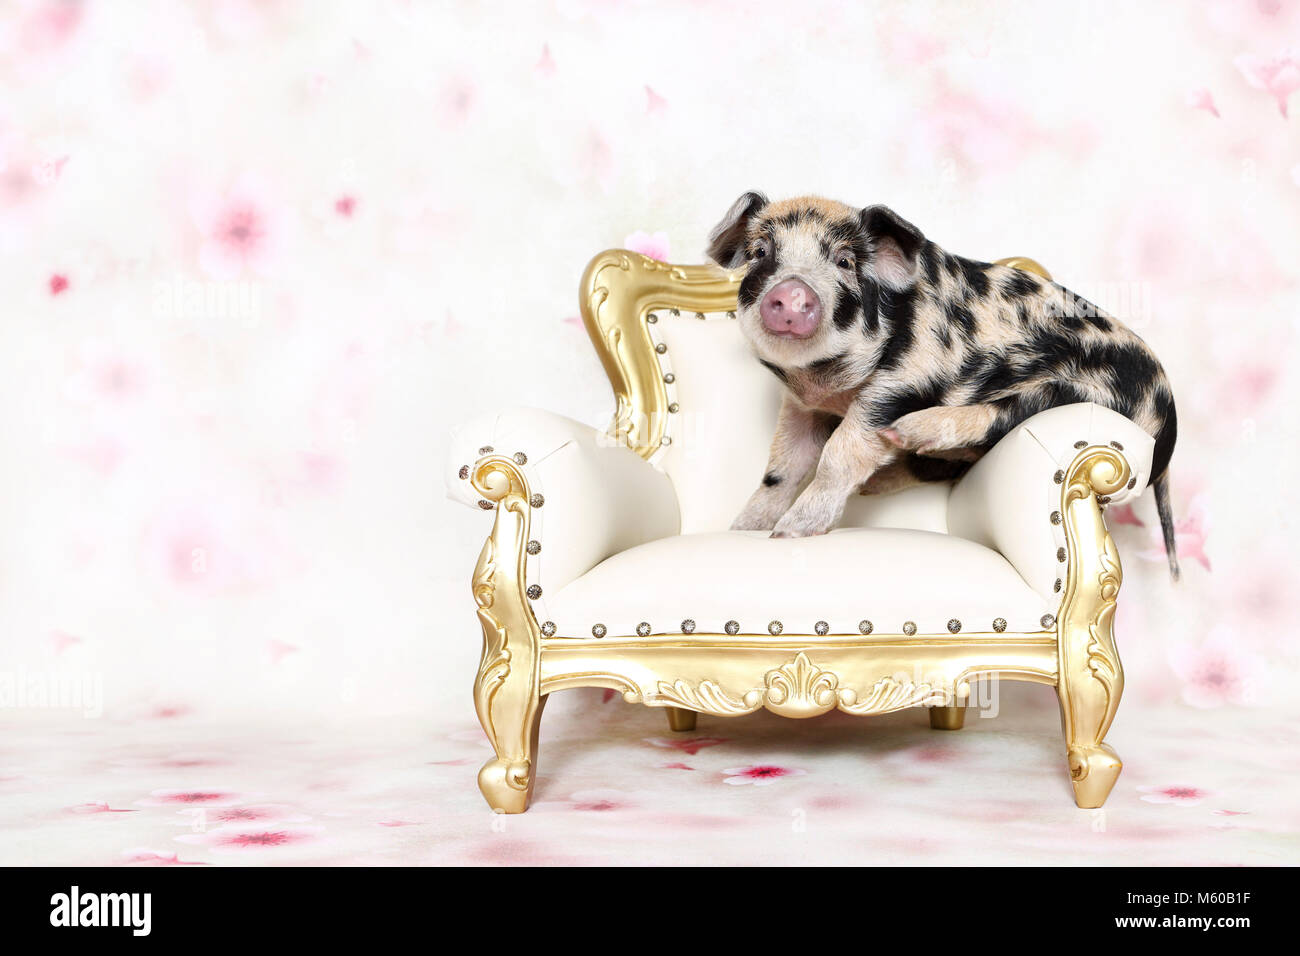 Domestic Pig, Turopolje x ?. Piglet (4 weeks old) on an antique armchair. Studio picture seen against a white background with flower print. Germany Stock Photo